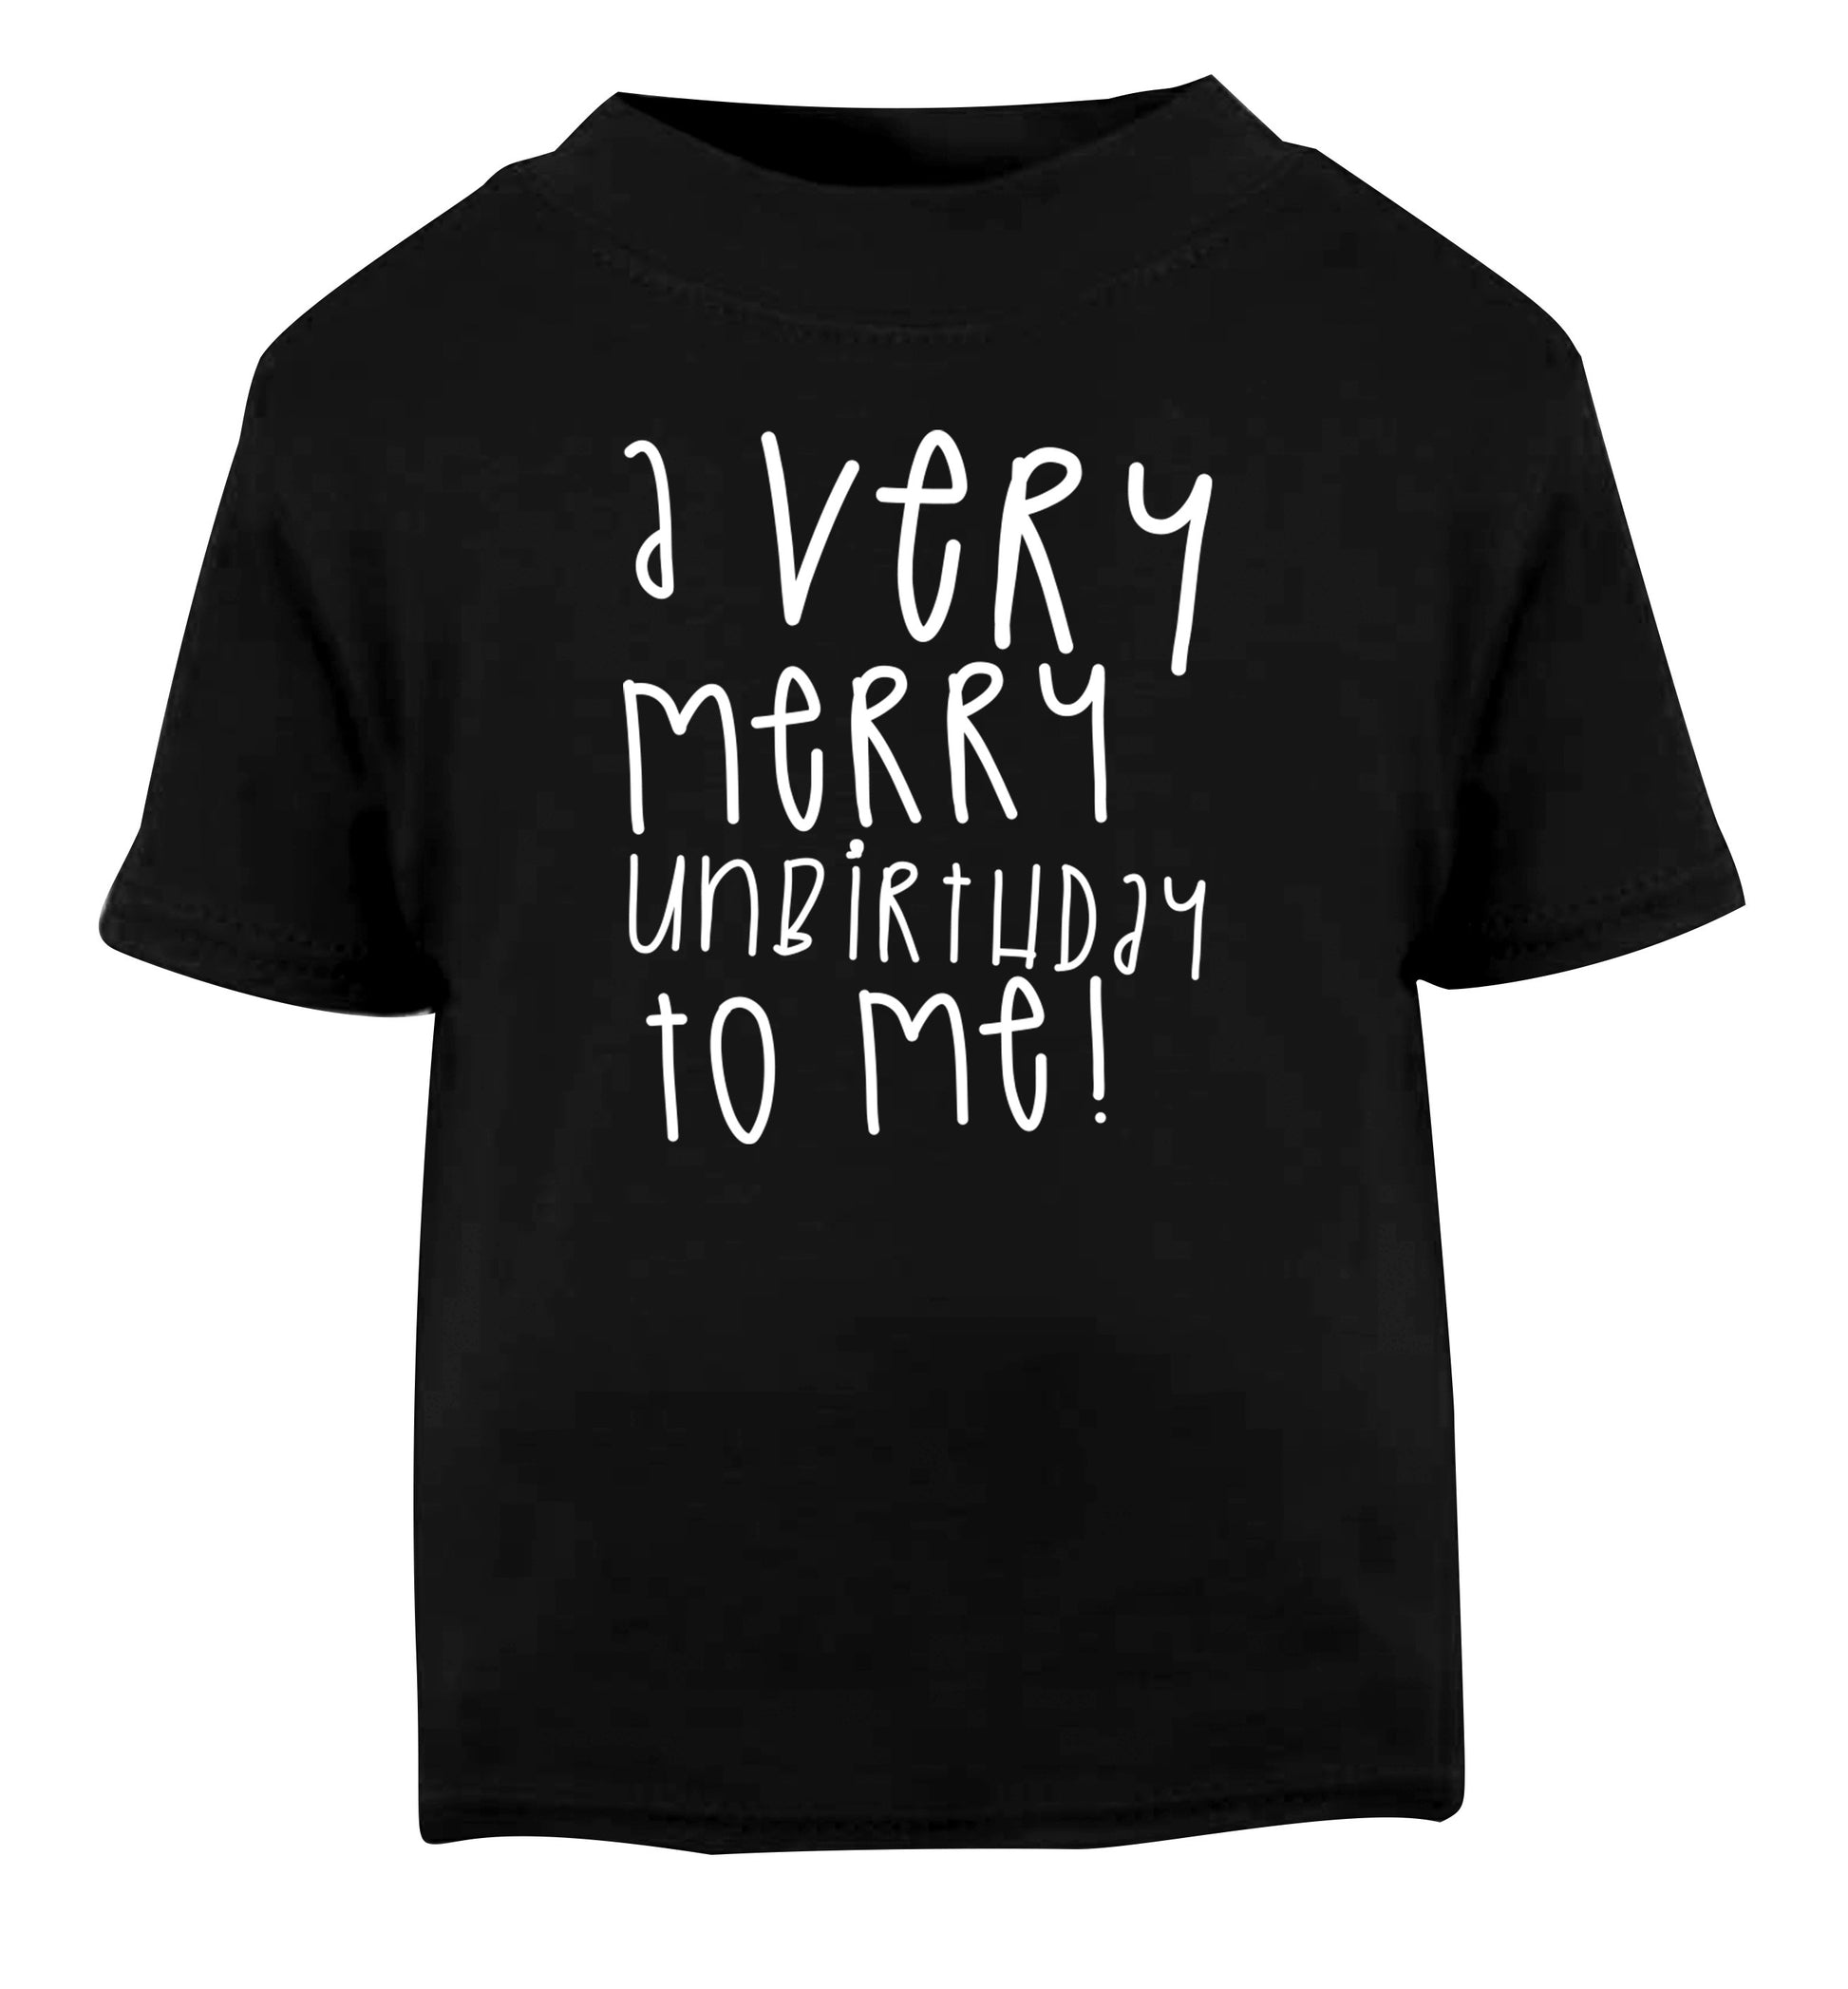 A very merry unbirthday to me! Black Baby Toddler Tshirt 2 years